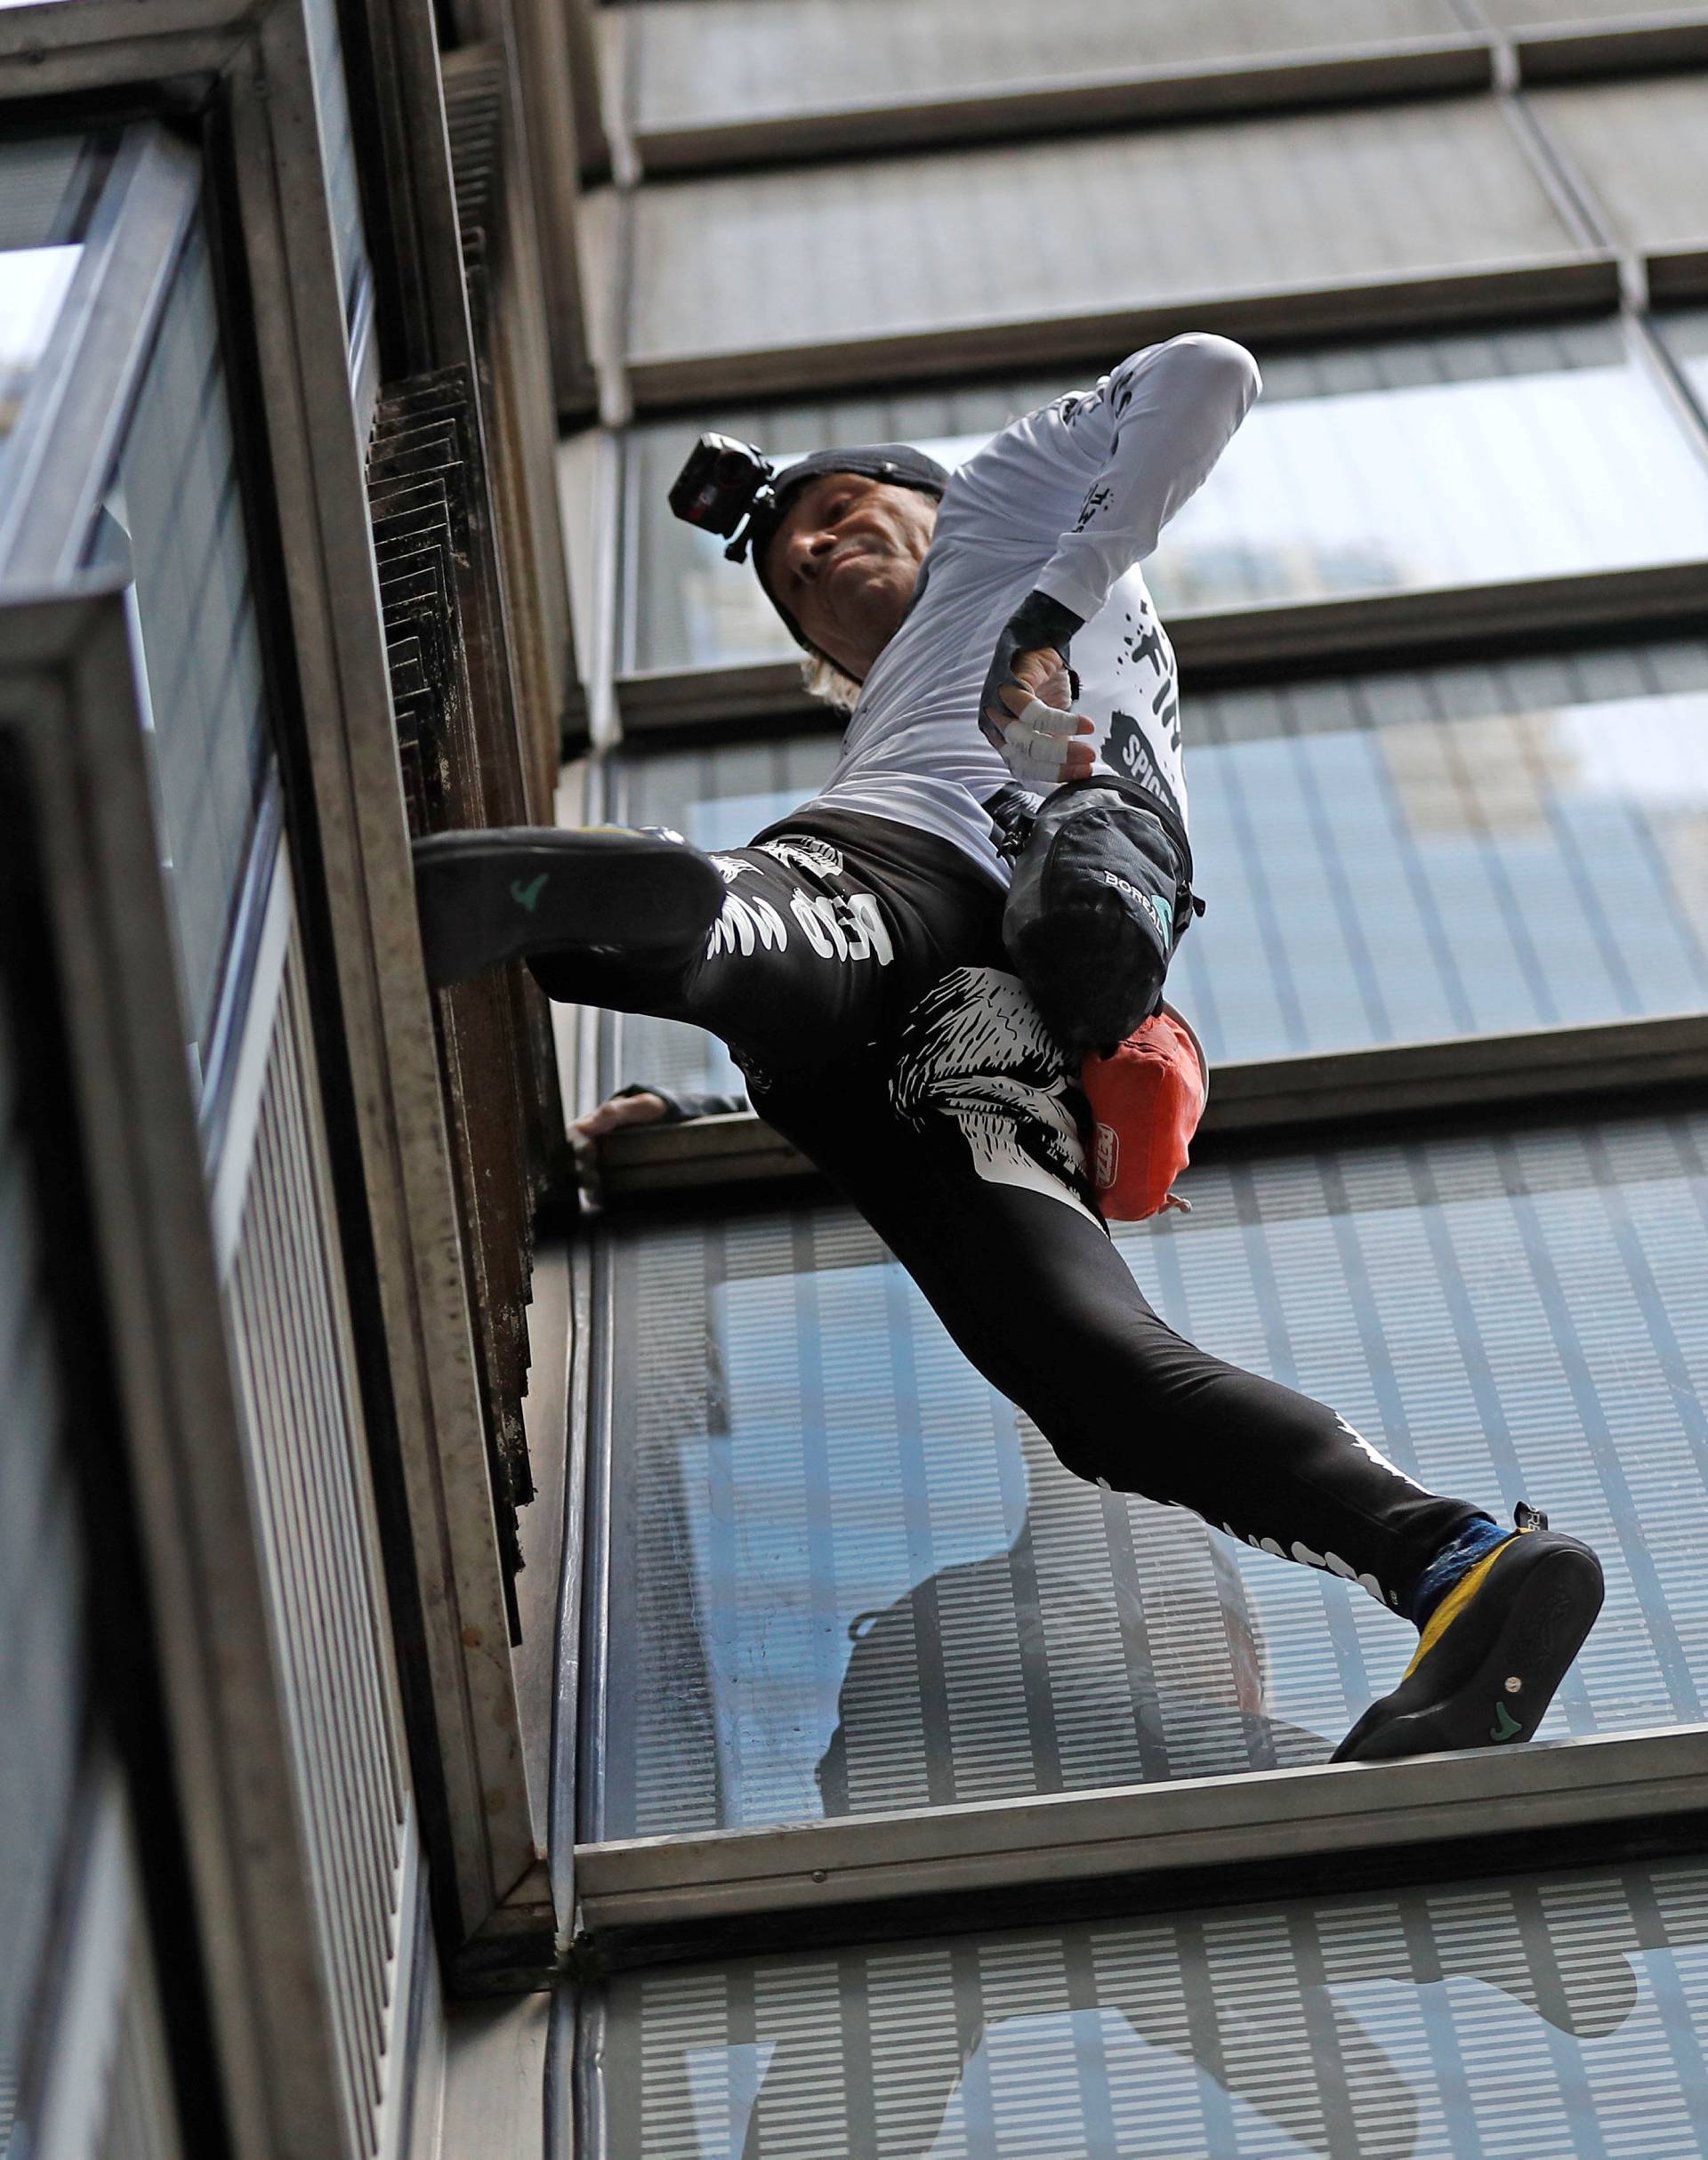 French free-climber Alain Robert, known as 'Spiderman', attempts to climb up the outside of the Heron Tower in the financial district of London